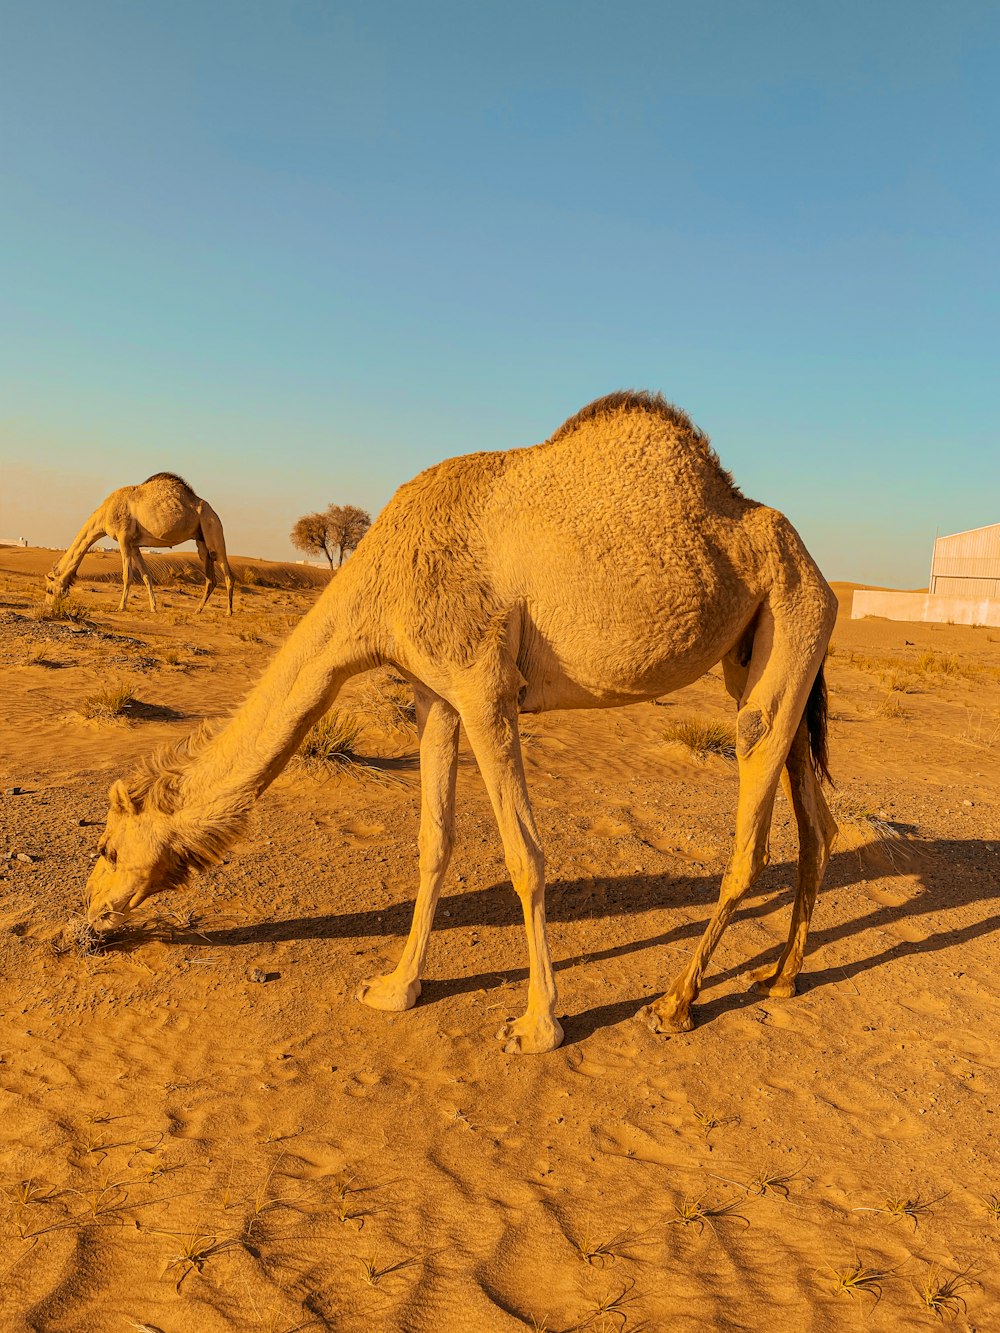 a camel grazing in the middle of a desert